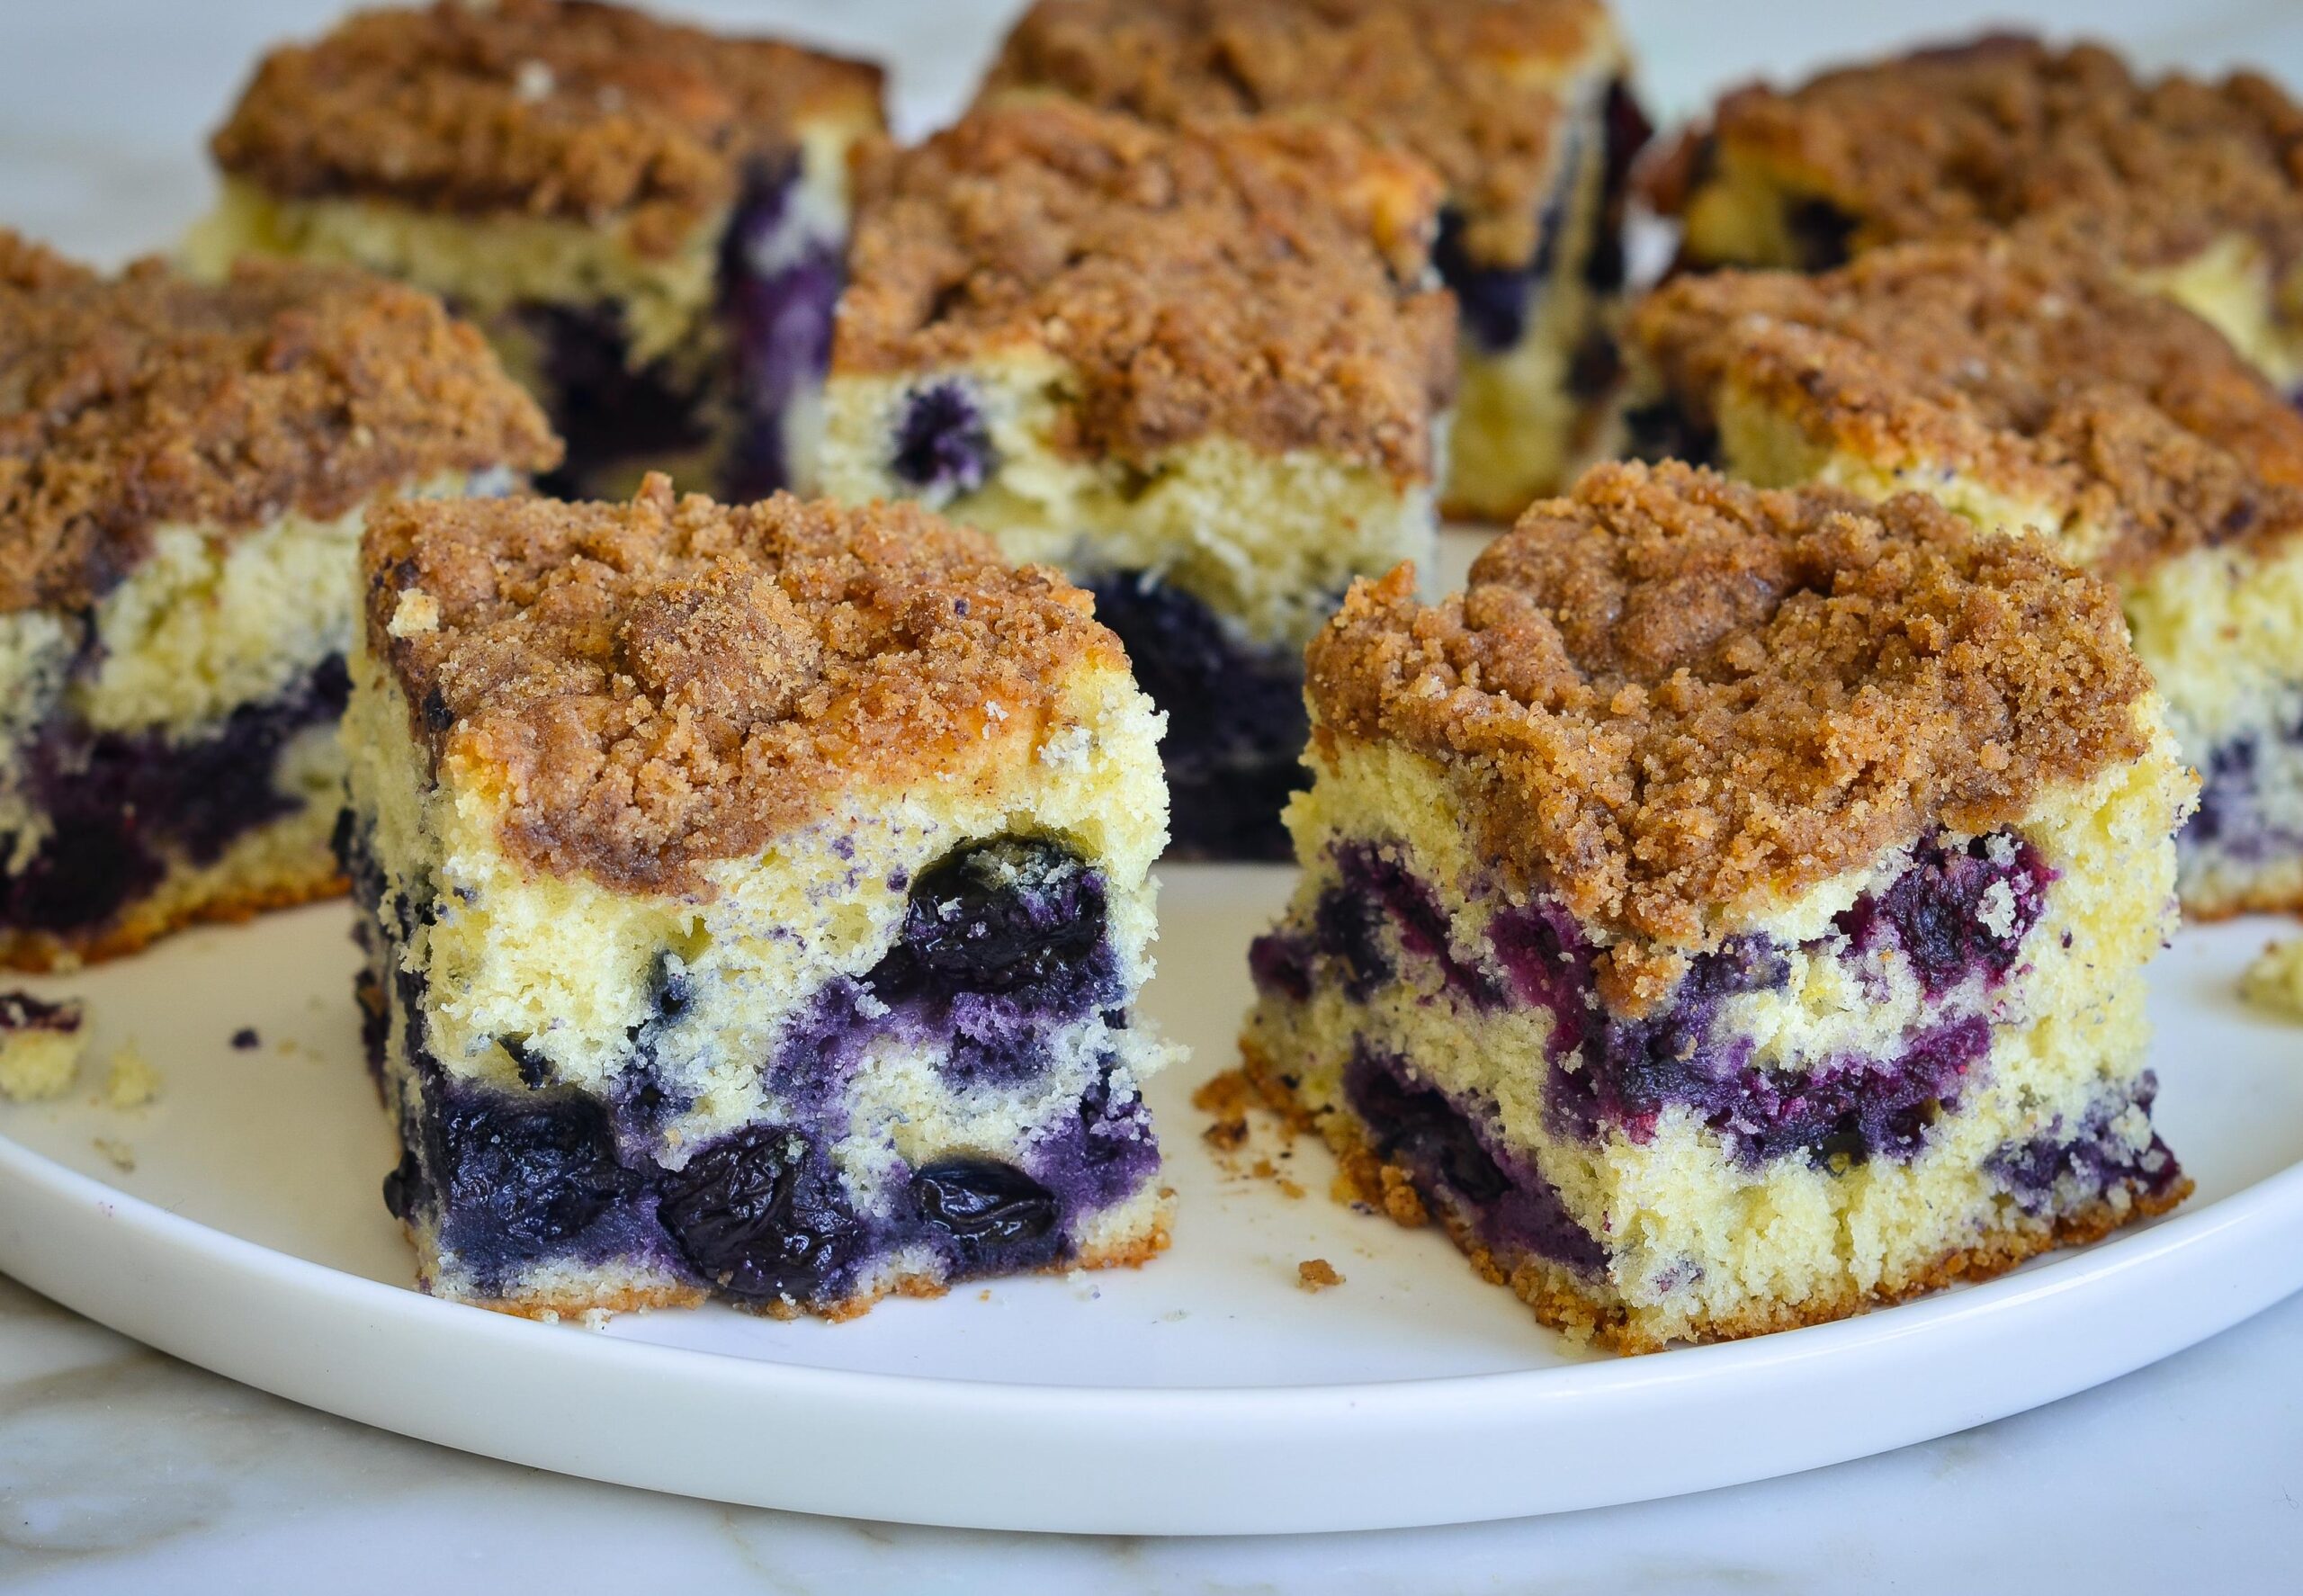  This coffee cake is a colorful work of art.